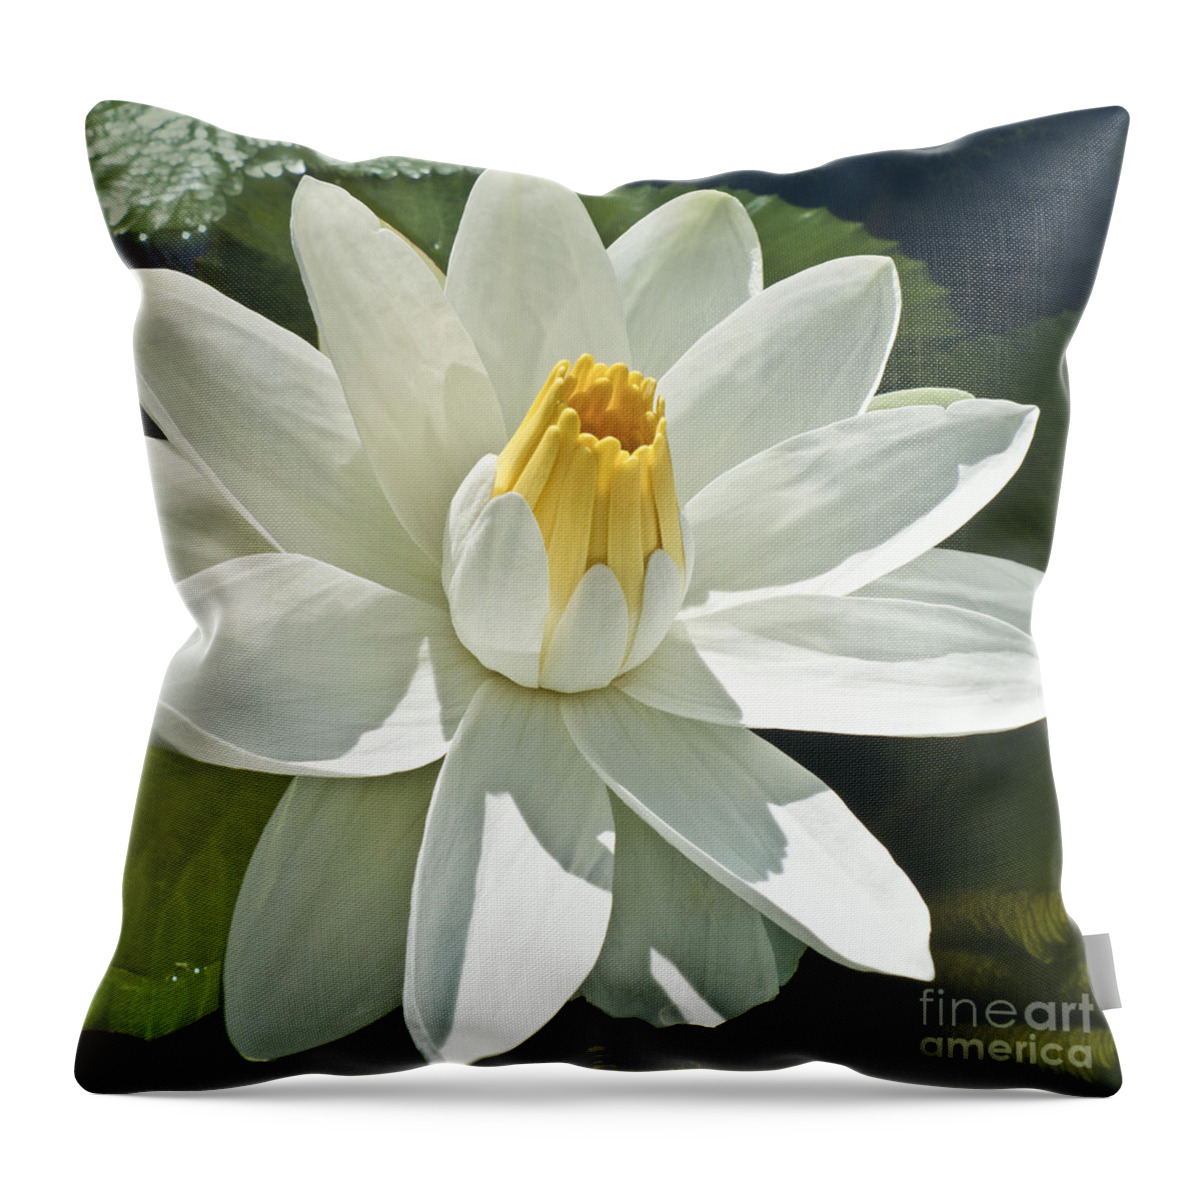 Water Llilies Throw Pillow featuring the photograph White Water Lily - Nymphaea #1 by Heiko Koehrer-Wagner